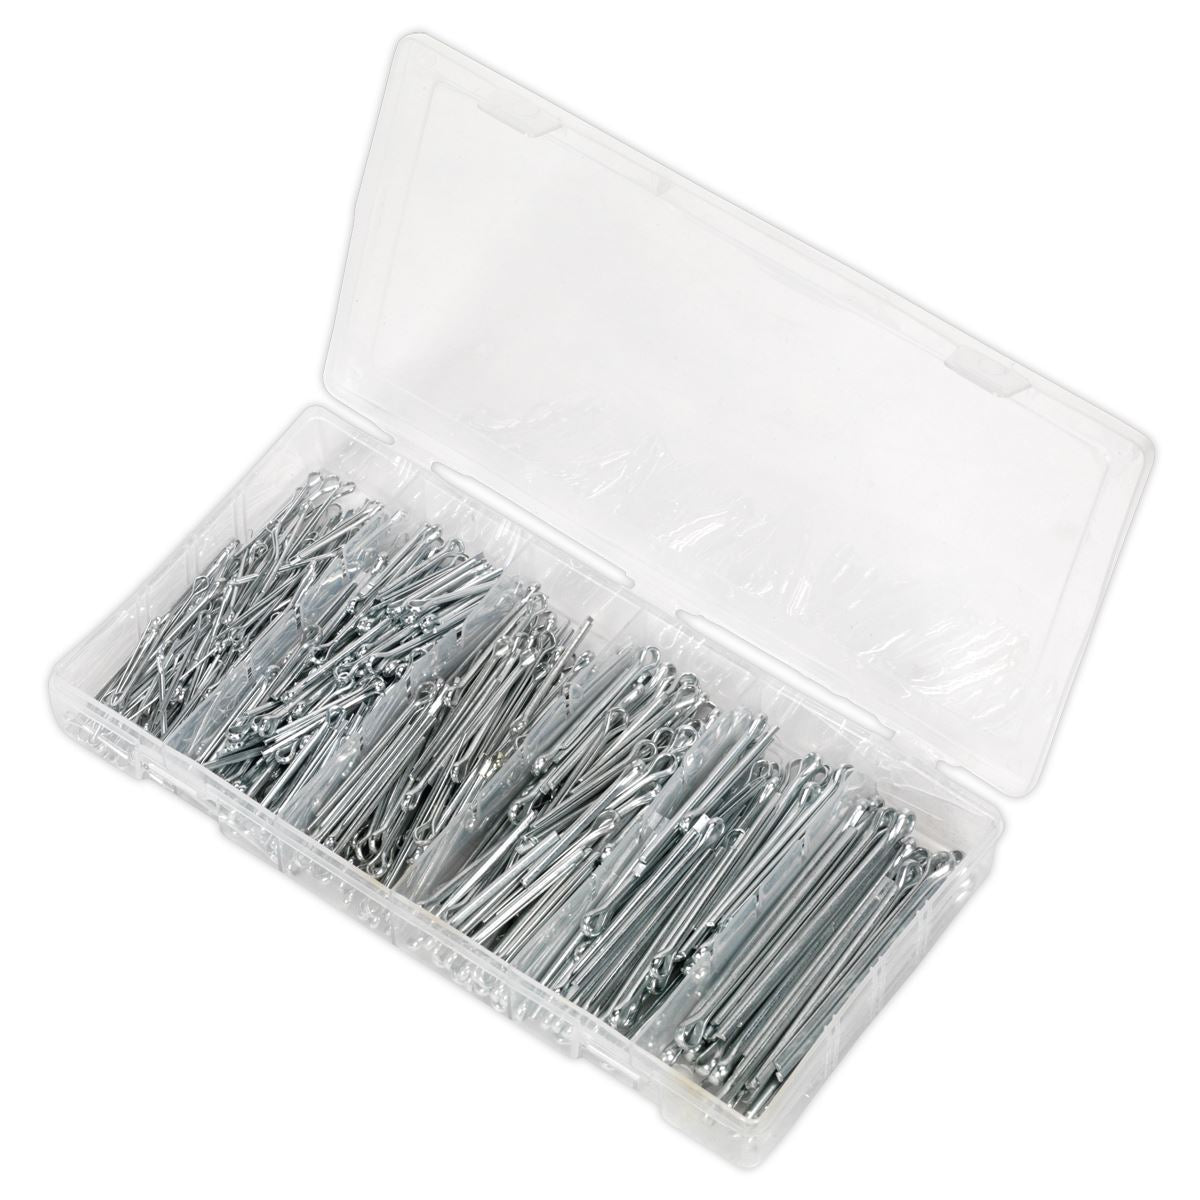 Sealey Split Pin Assortment 555pc Small Sizes Metric & Imperial